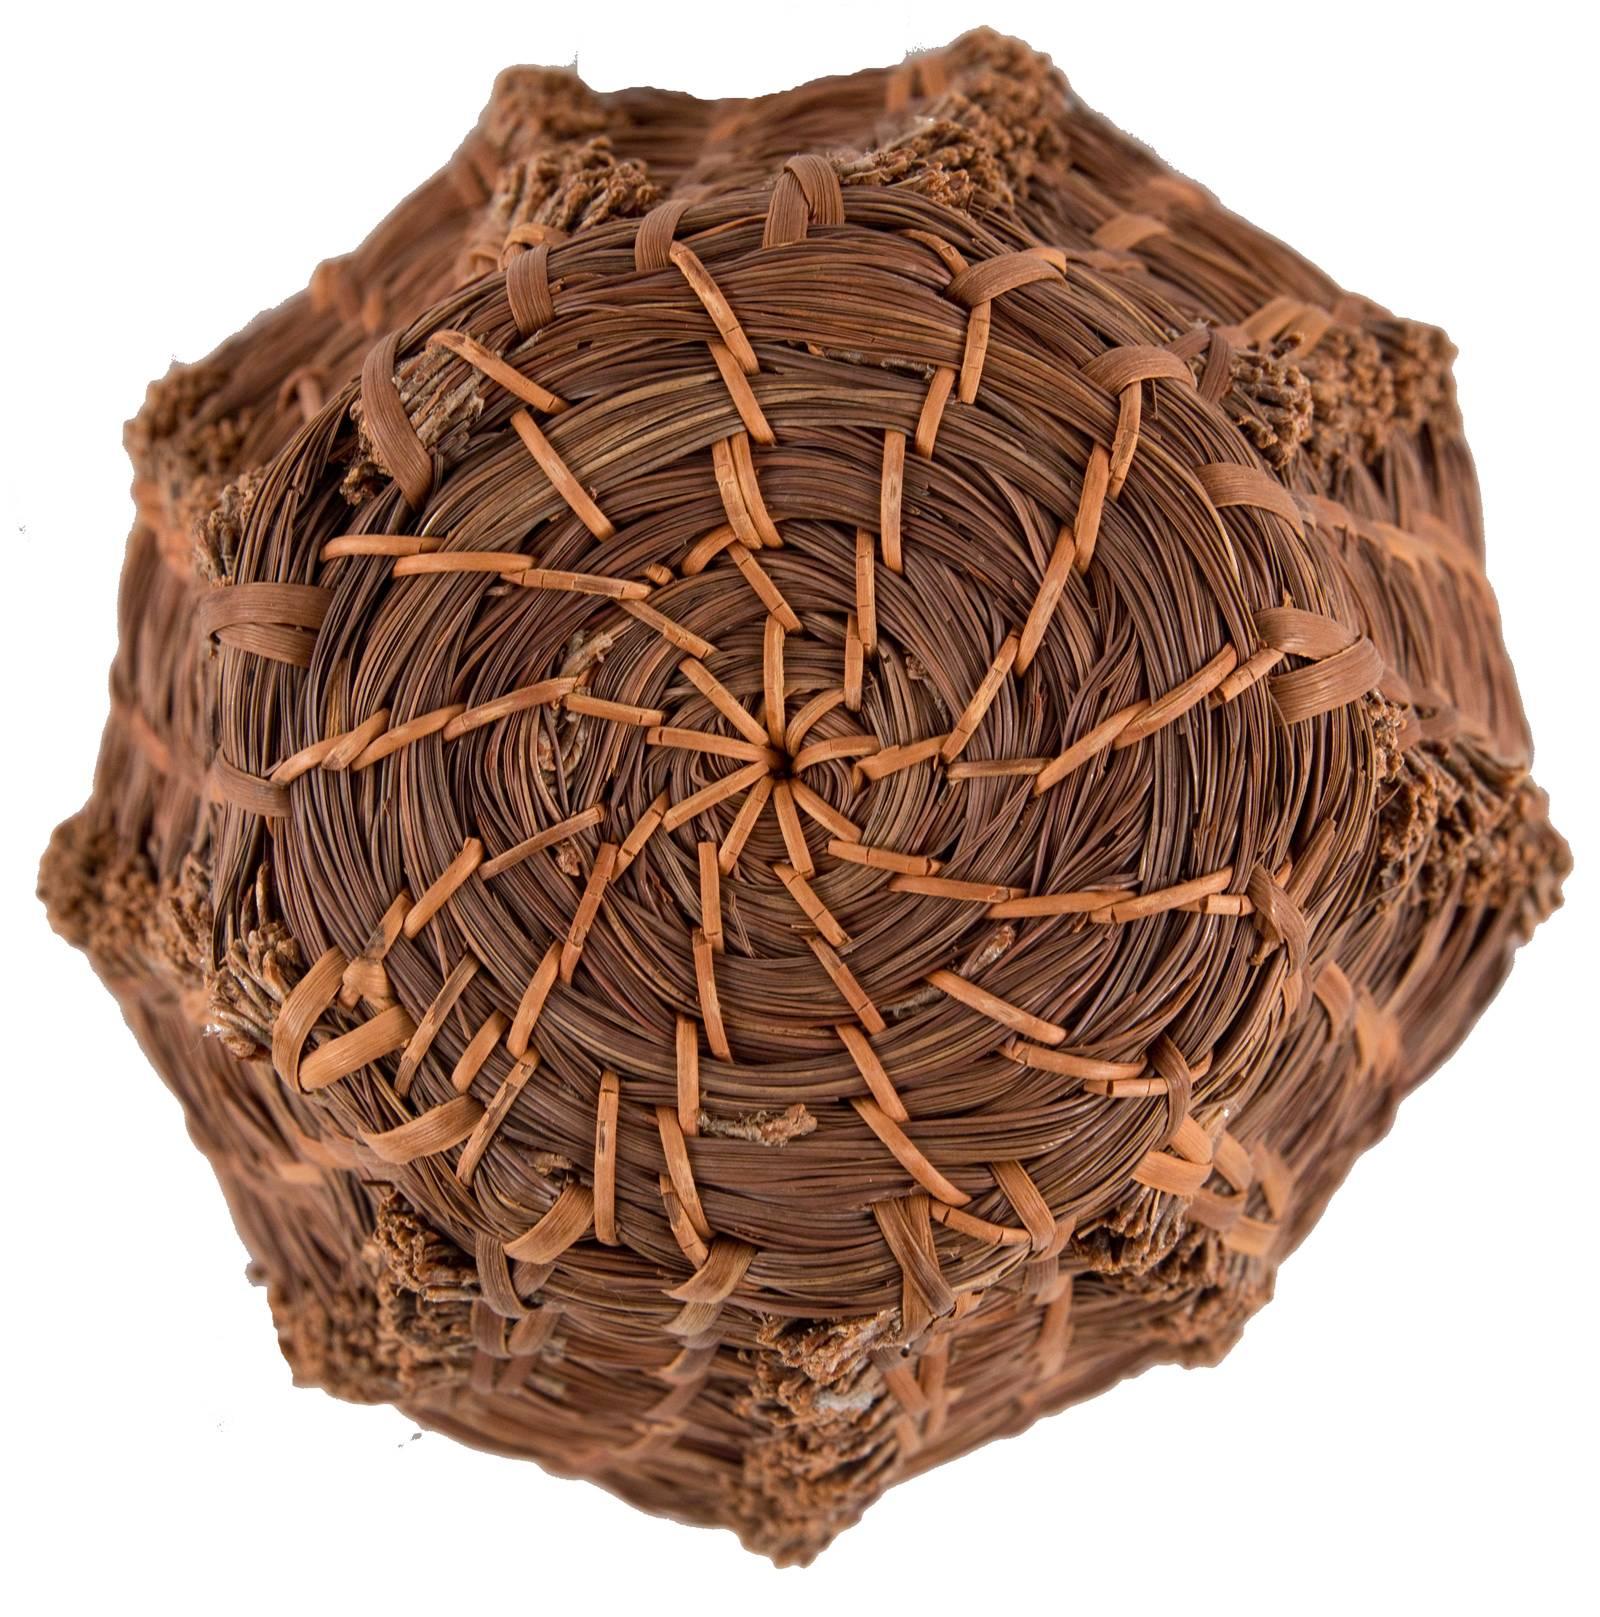 Coils of pine needles are bound together in layers with exposed ends that, when placed on top of one another, form a textural linear decorative element that balances that utilitarian functionality of the basket.